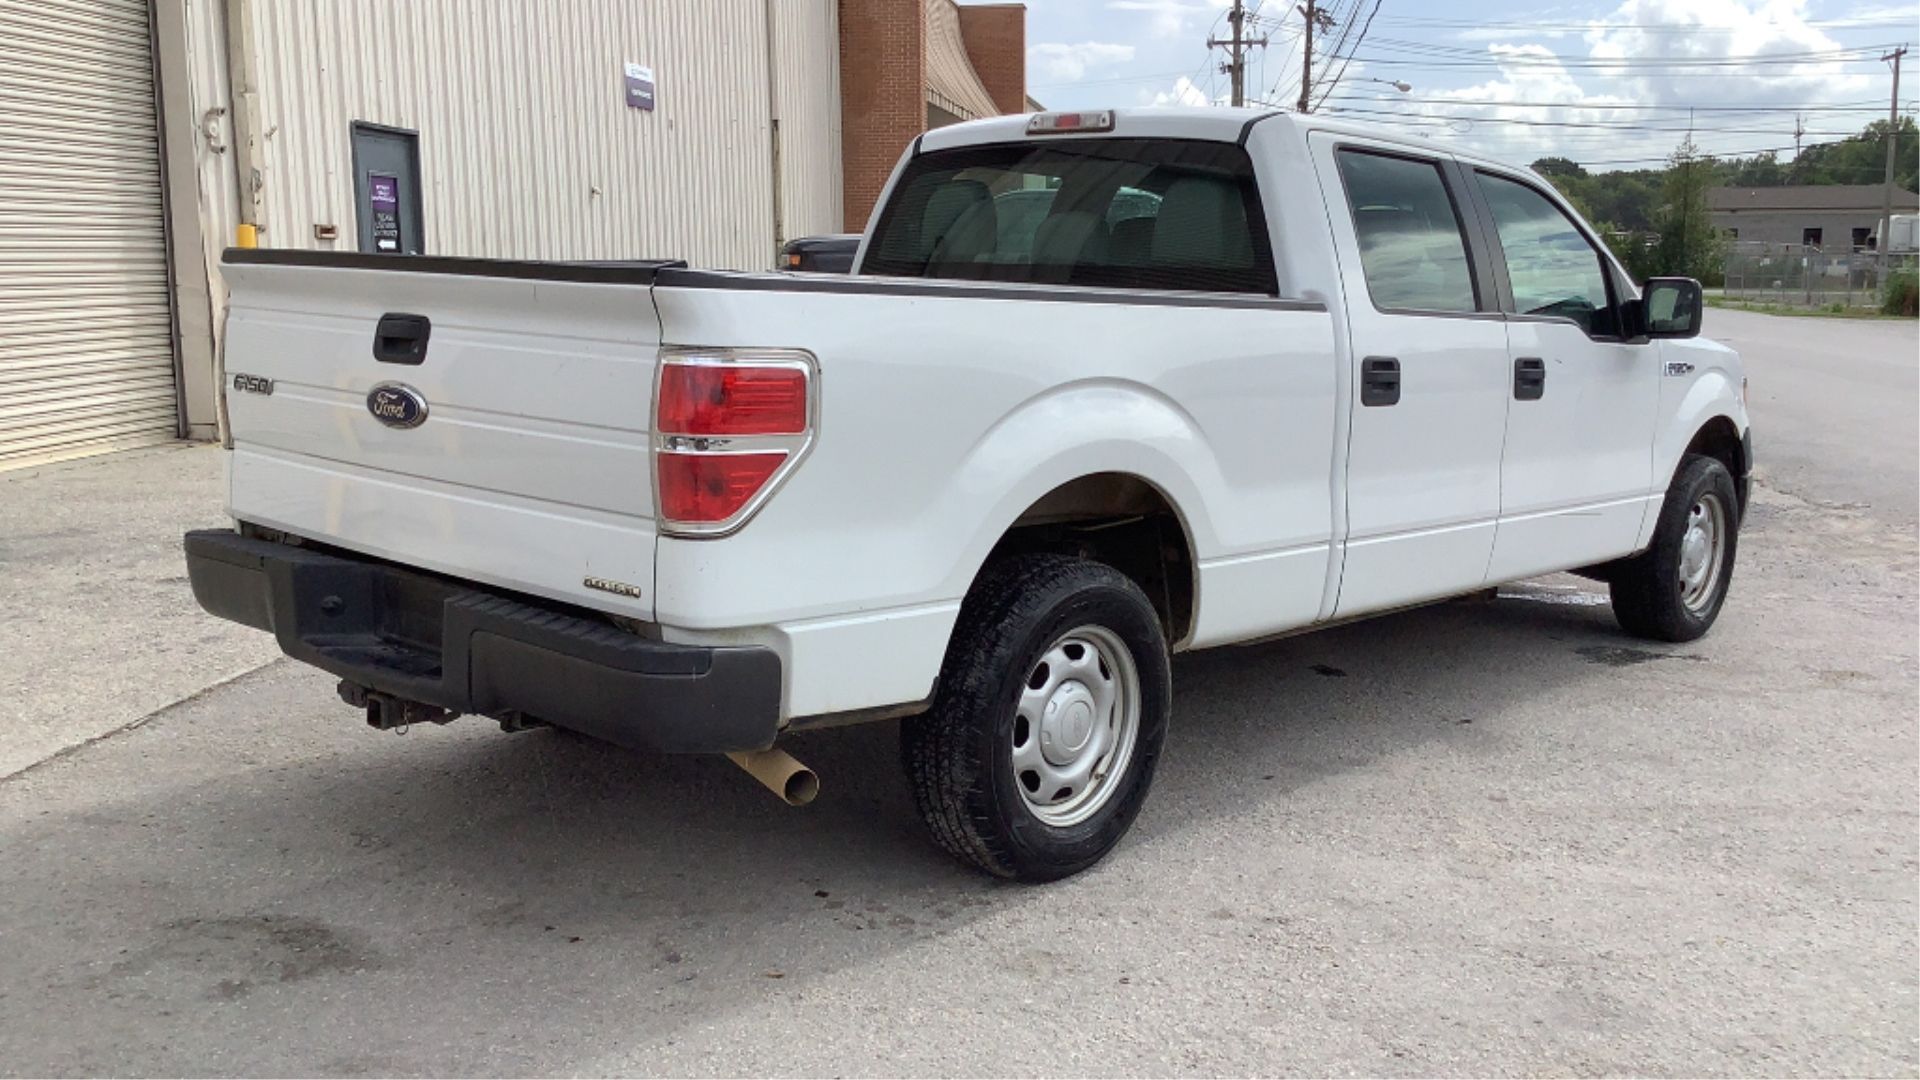 2012 Ford F150 XL Crew Cab 2WD - Image 18 of 86